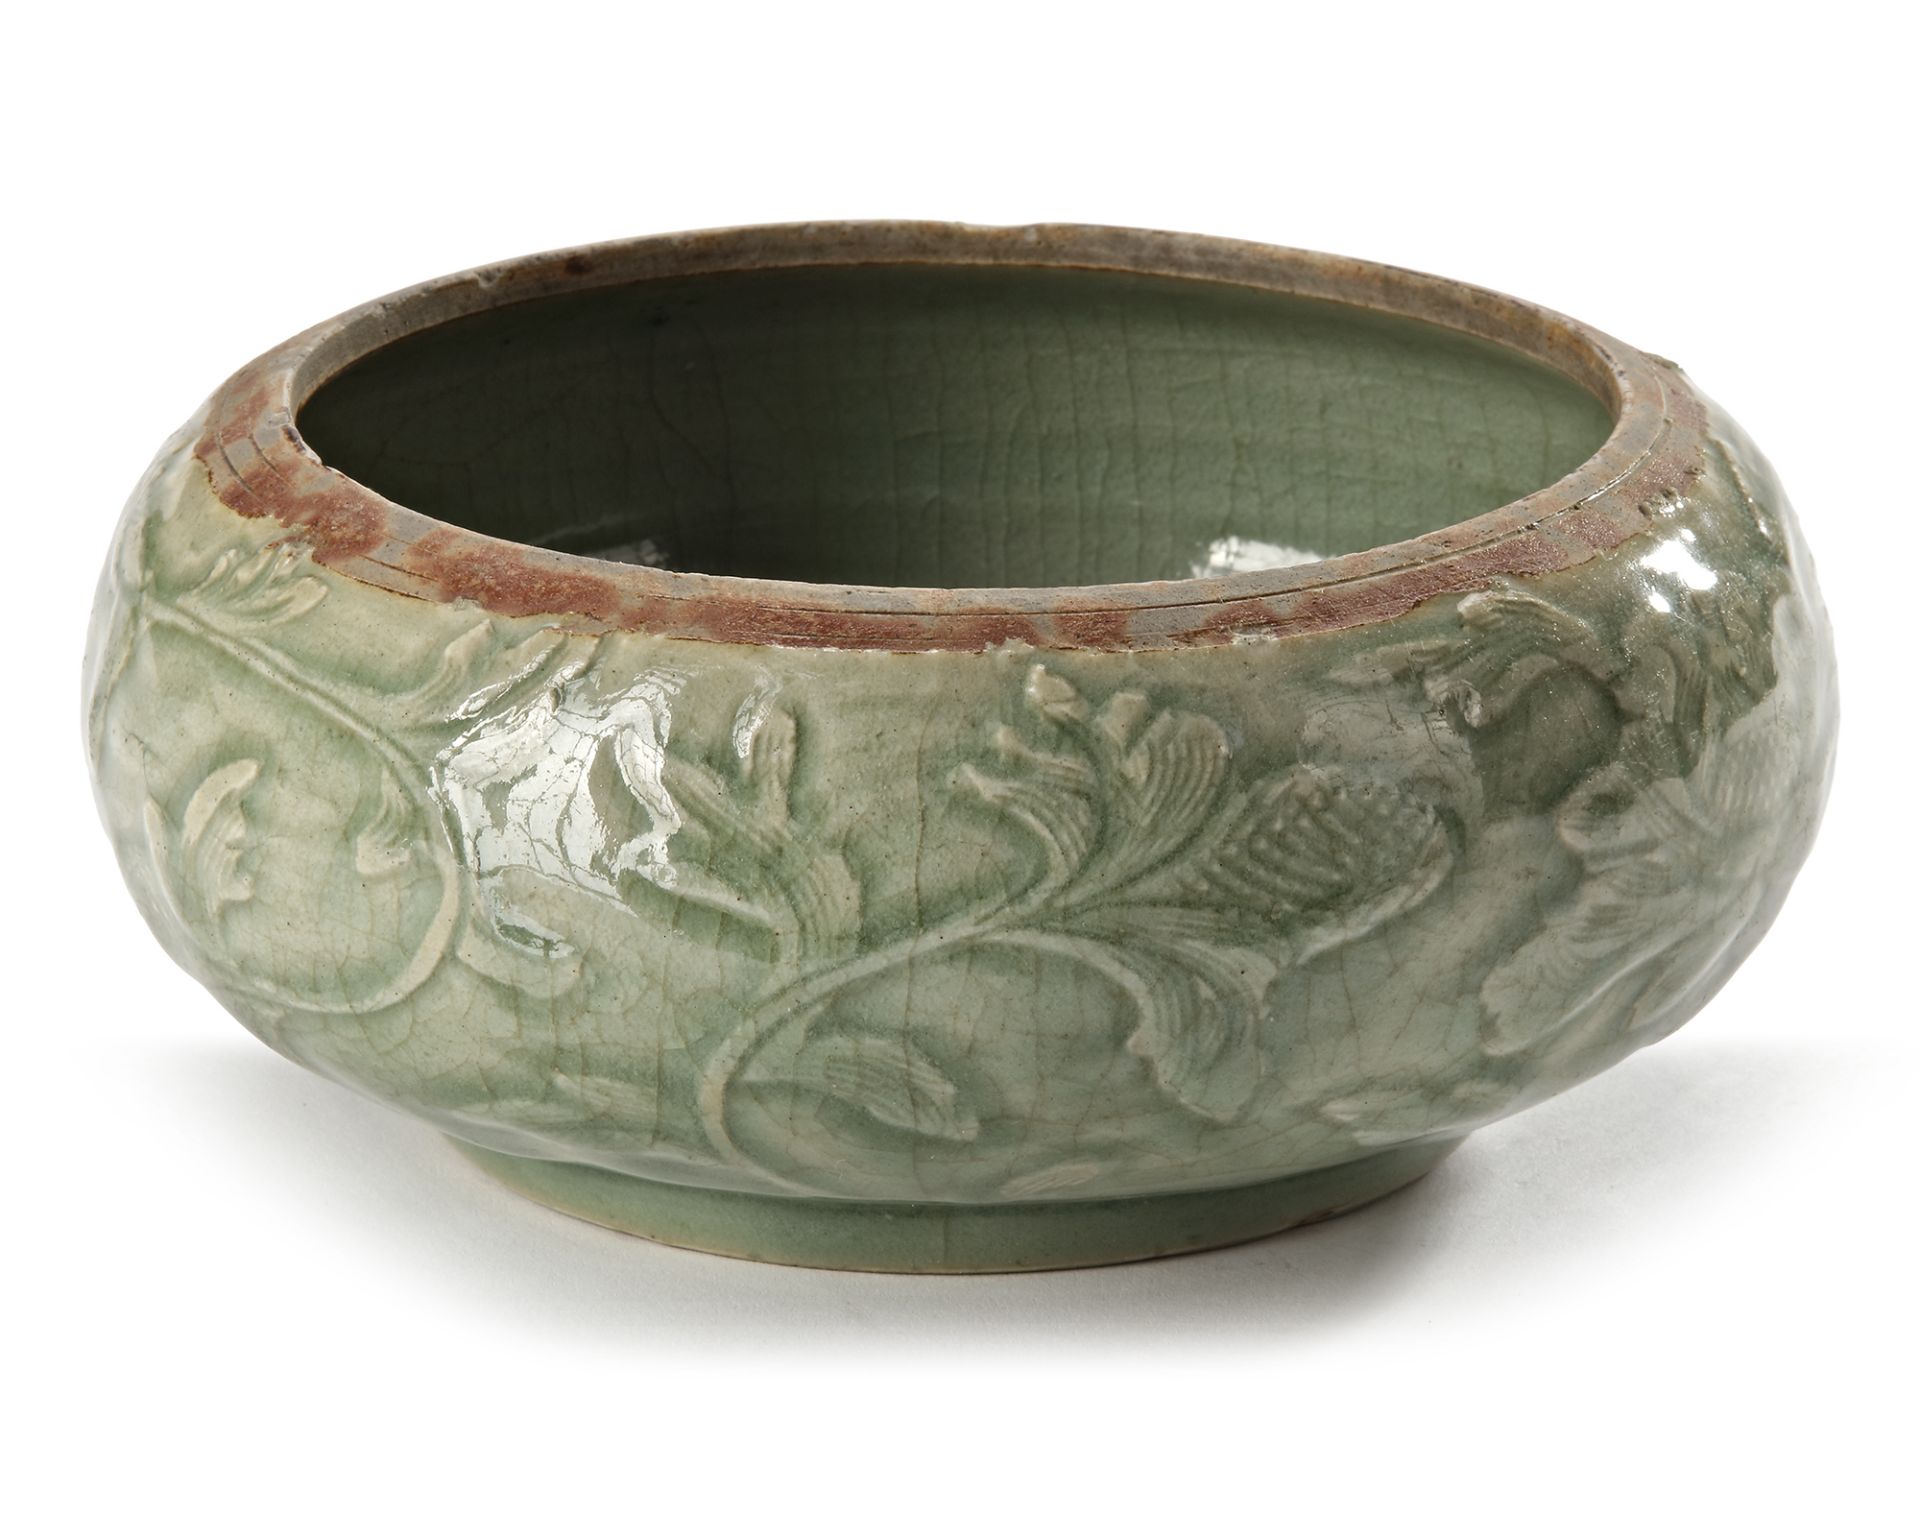 A CHINESE LONGQUAN CELADON BOWL, MING DYNASTY, 15TH CENTURY - Image 2 of 4